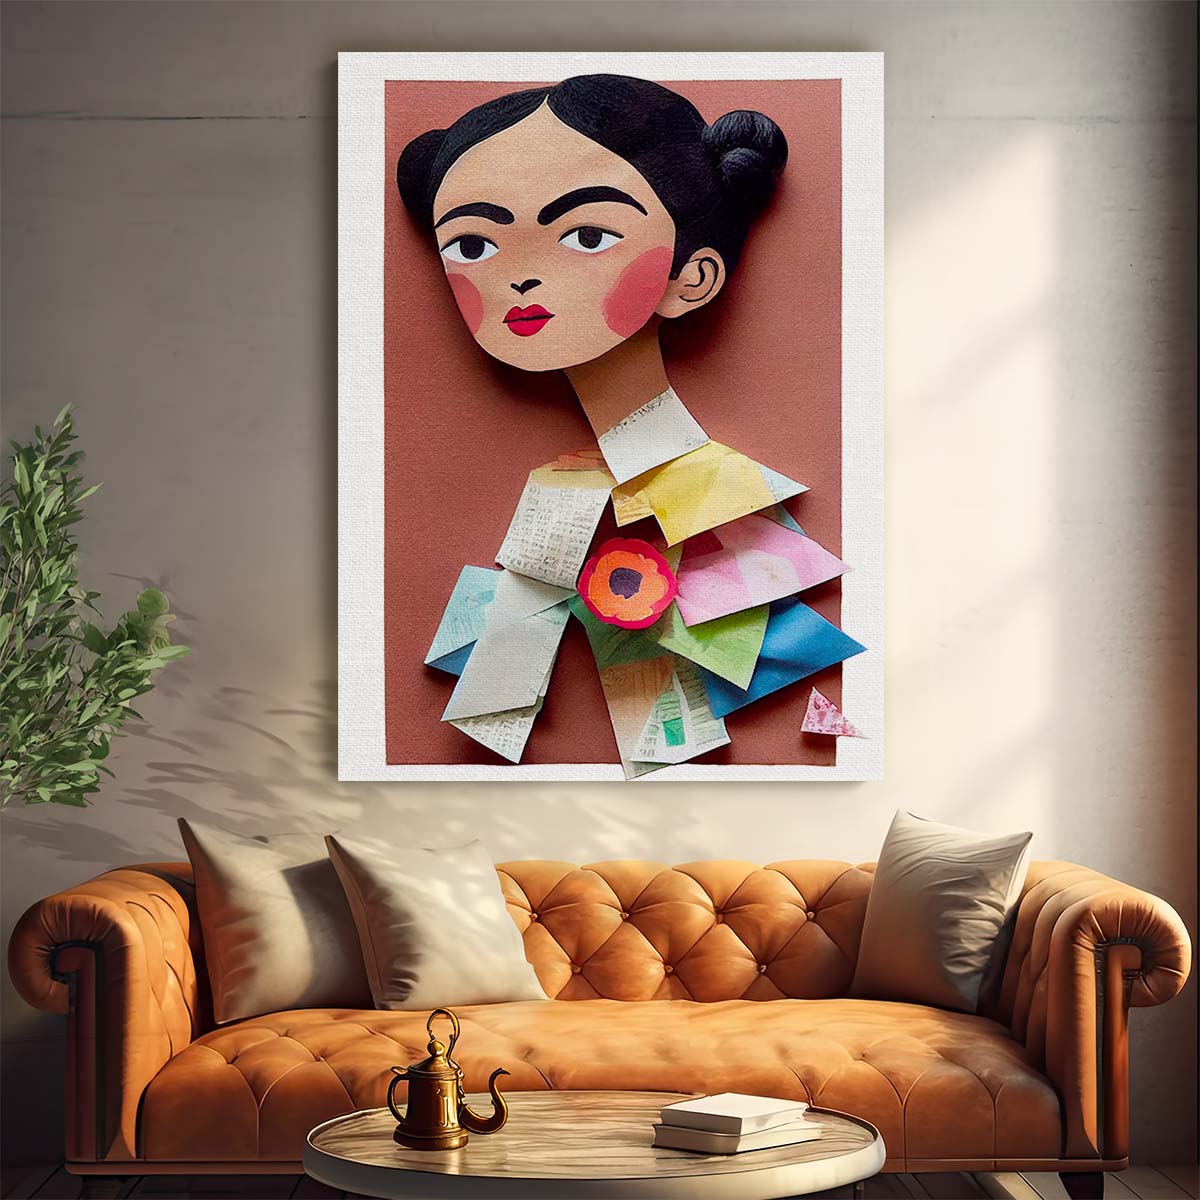 3D Colorful Frida Kahlo Portrait Paper Art by Treechild by Luxuriance Designs, made in USA